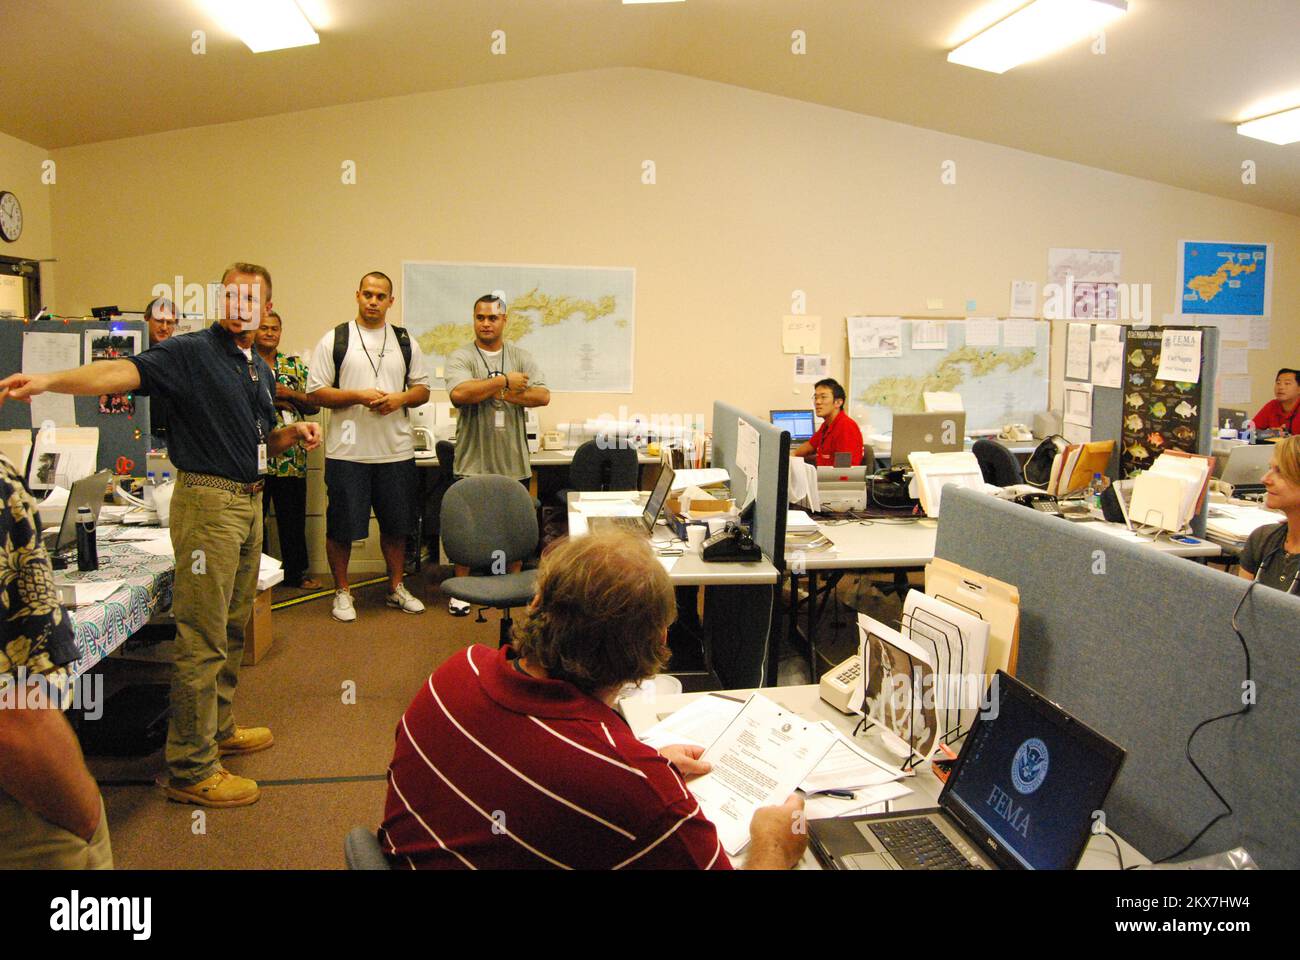 Former NFL Football Players Visit FEMA Facility. American Samoa Earthquake, Tsunami, and Flooding. Photographs Relating to Disasters and Emergency Management Programs, Activities, and Officials Stock Photo